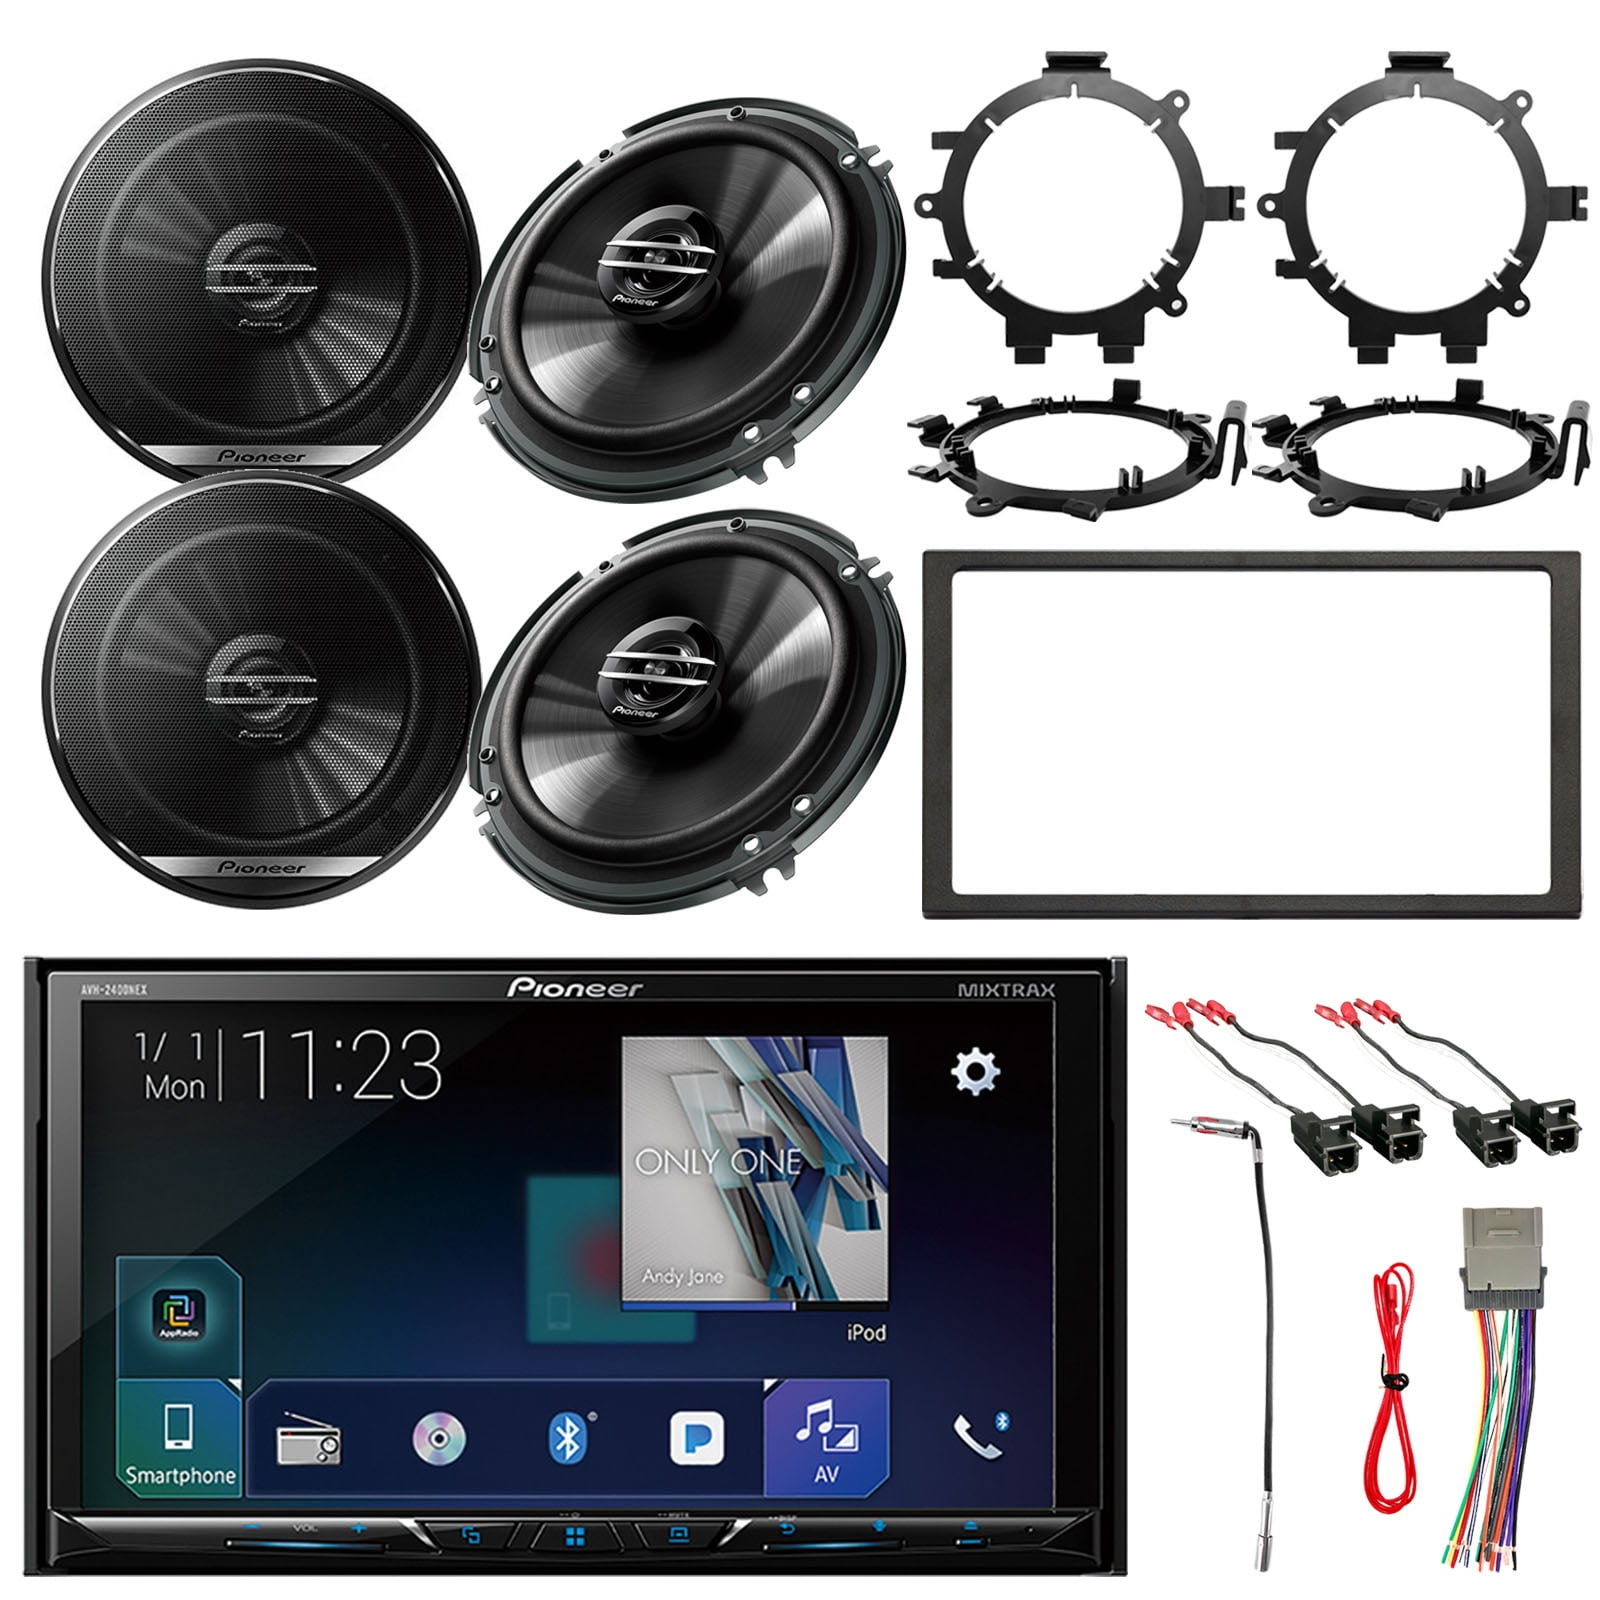 orkest knoflook een Pioneer 7" Double DIN Android Auto Apple CarPlay DVD/CD Receiver, 4x Pioneer  6.5" 2-Way Speakers, Double DIN Dash Kit for Select 1994-2012 GM Vehicles,  Wiring Harness, Antenna Adapter,Speaker Adapters - Walmart.com